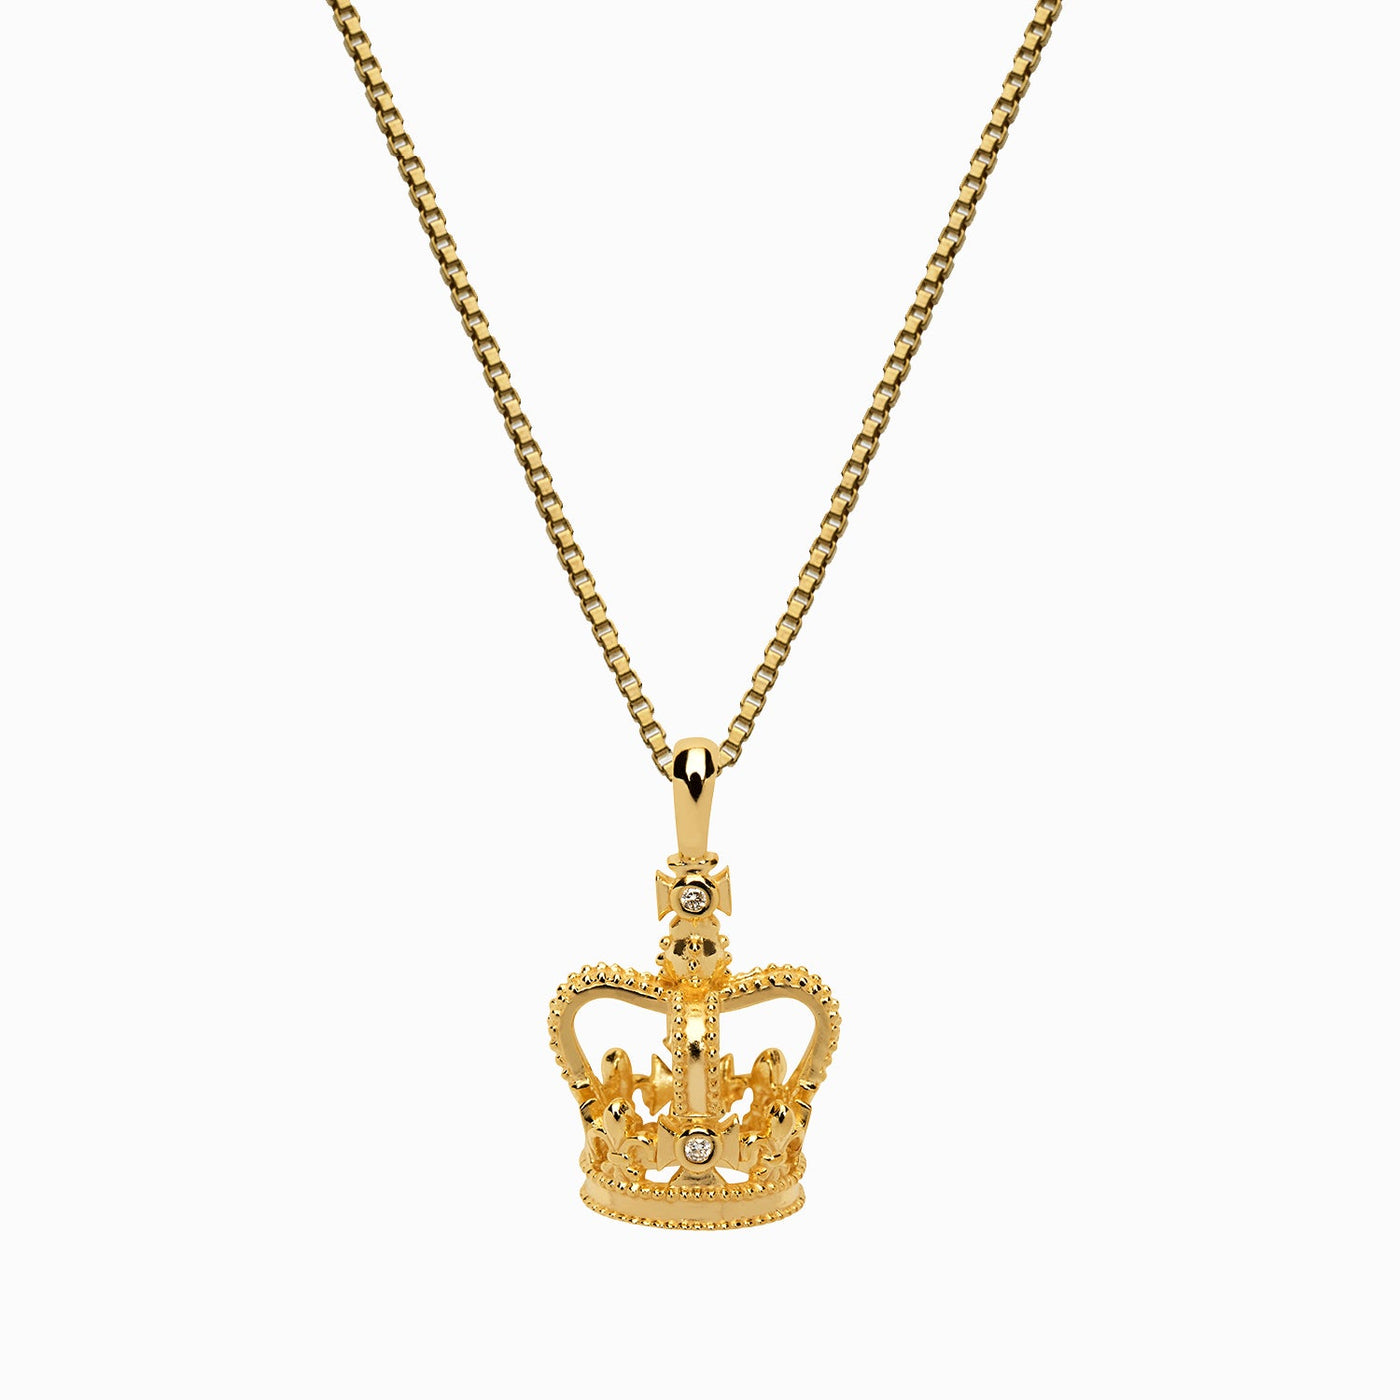 Diamond Crown Necklace by Awe Inspired